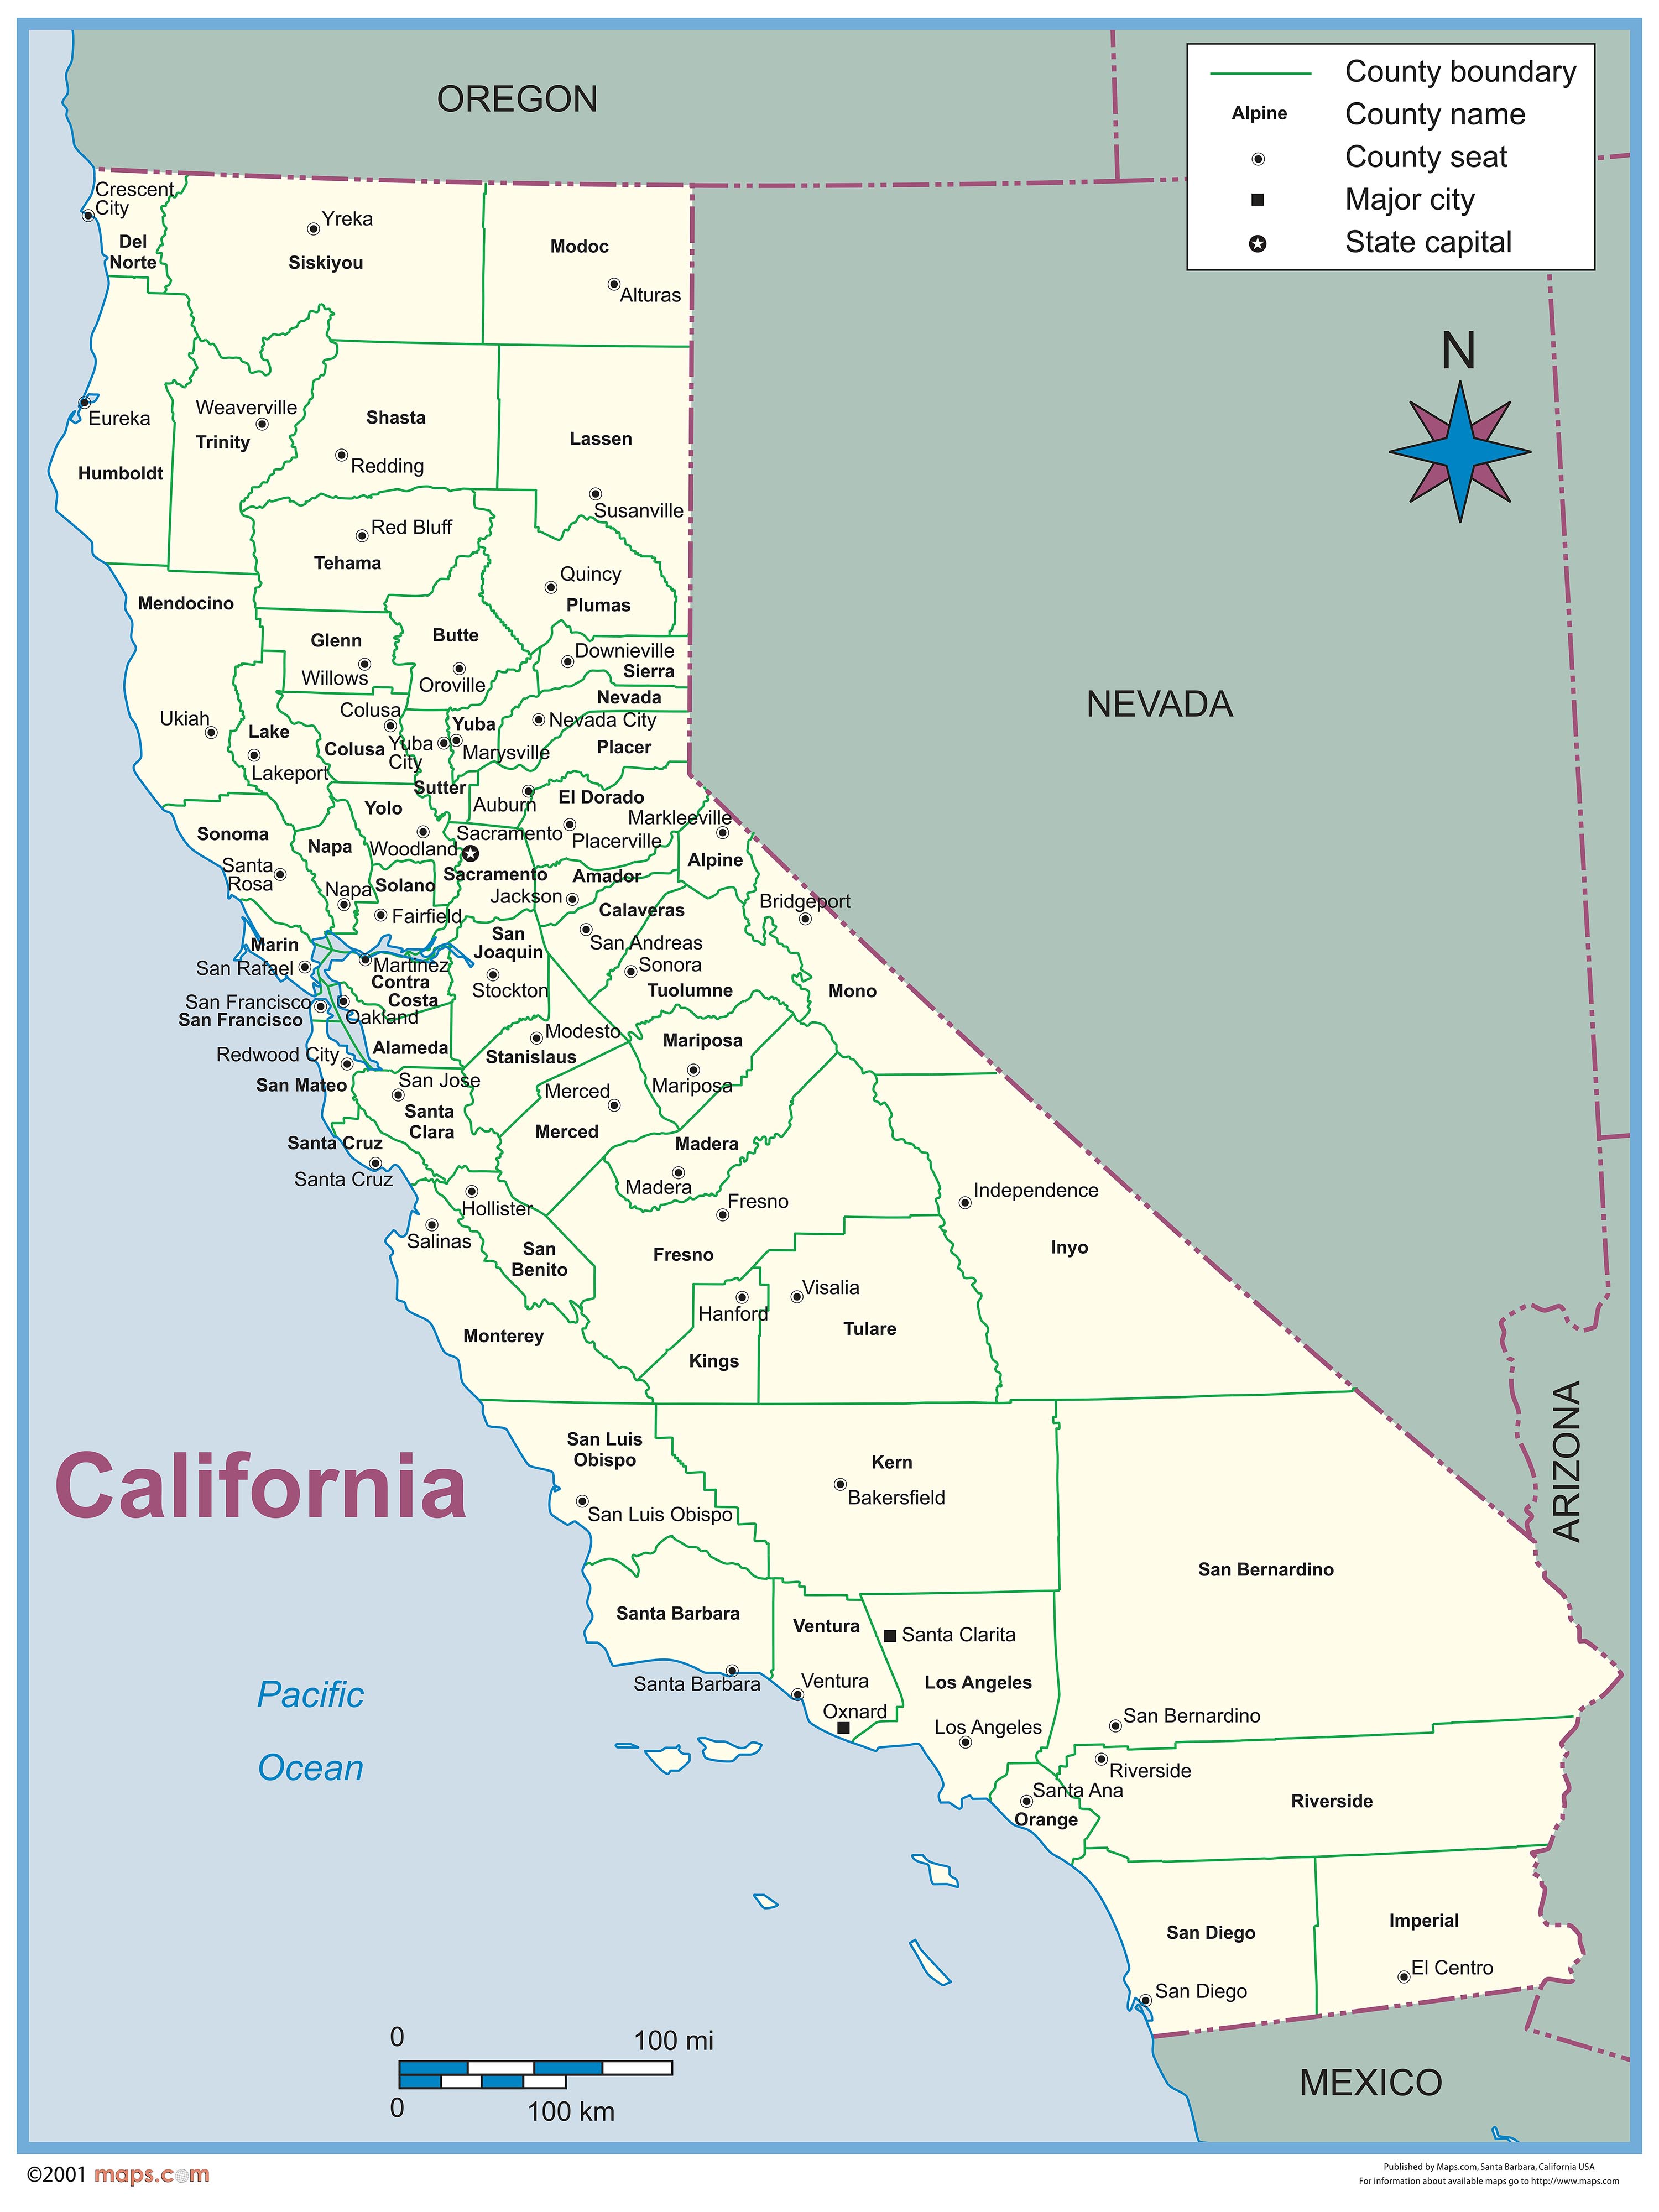 California County Outline Wall Map by MapSales